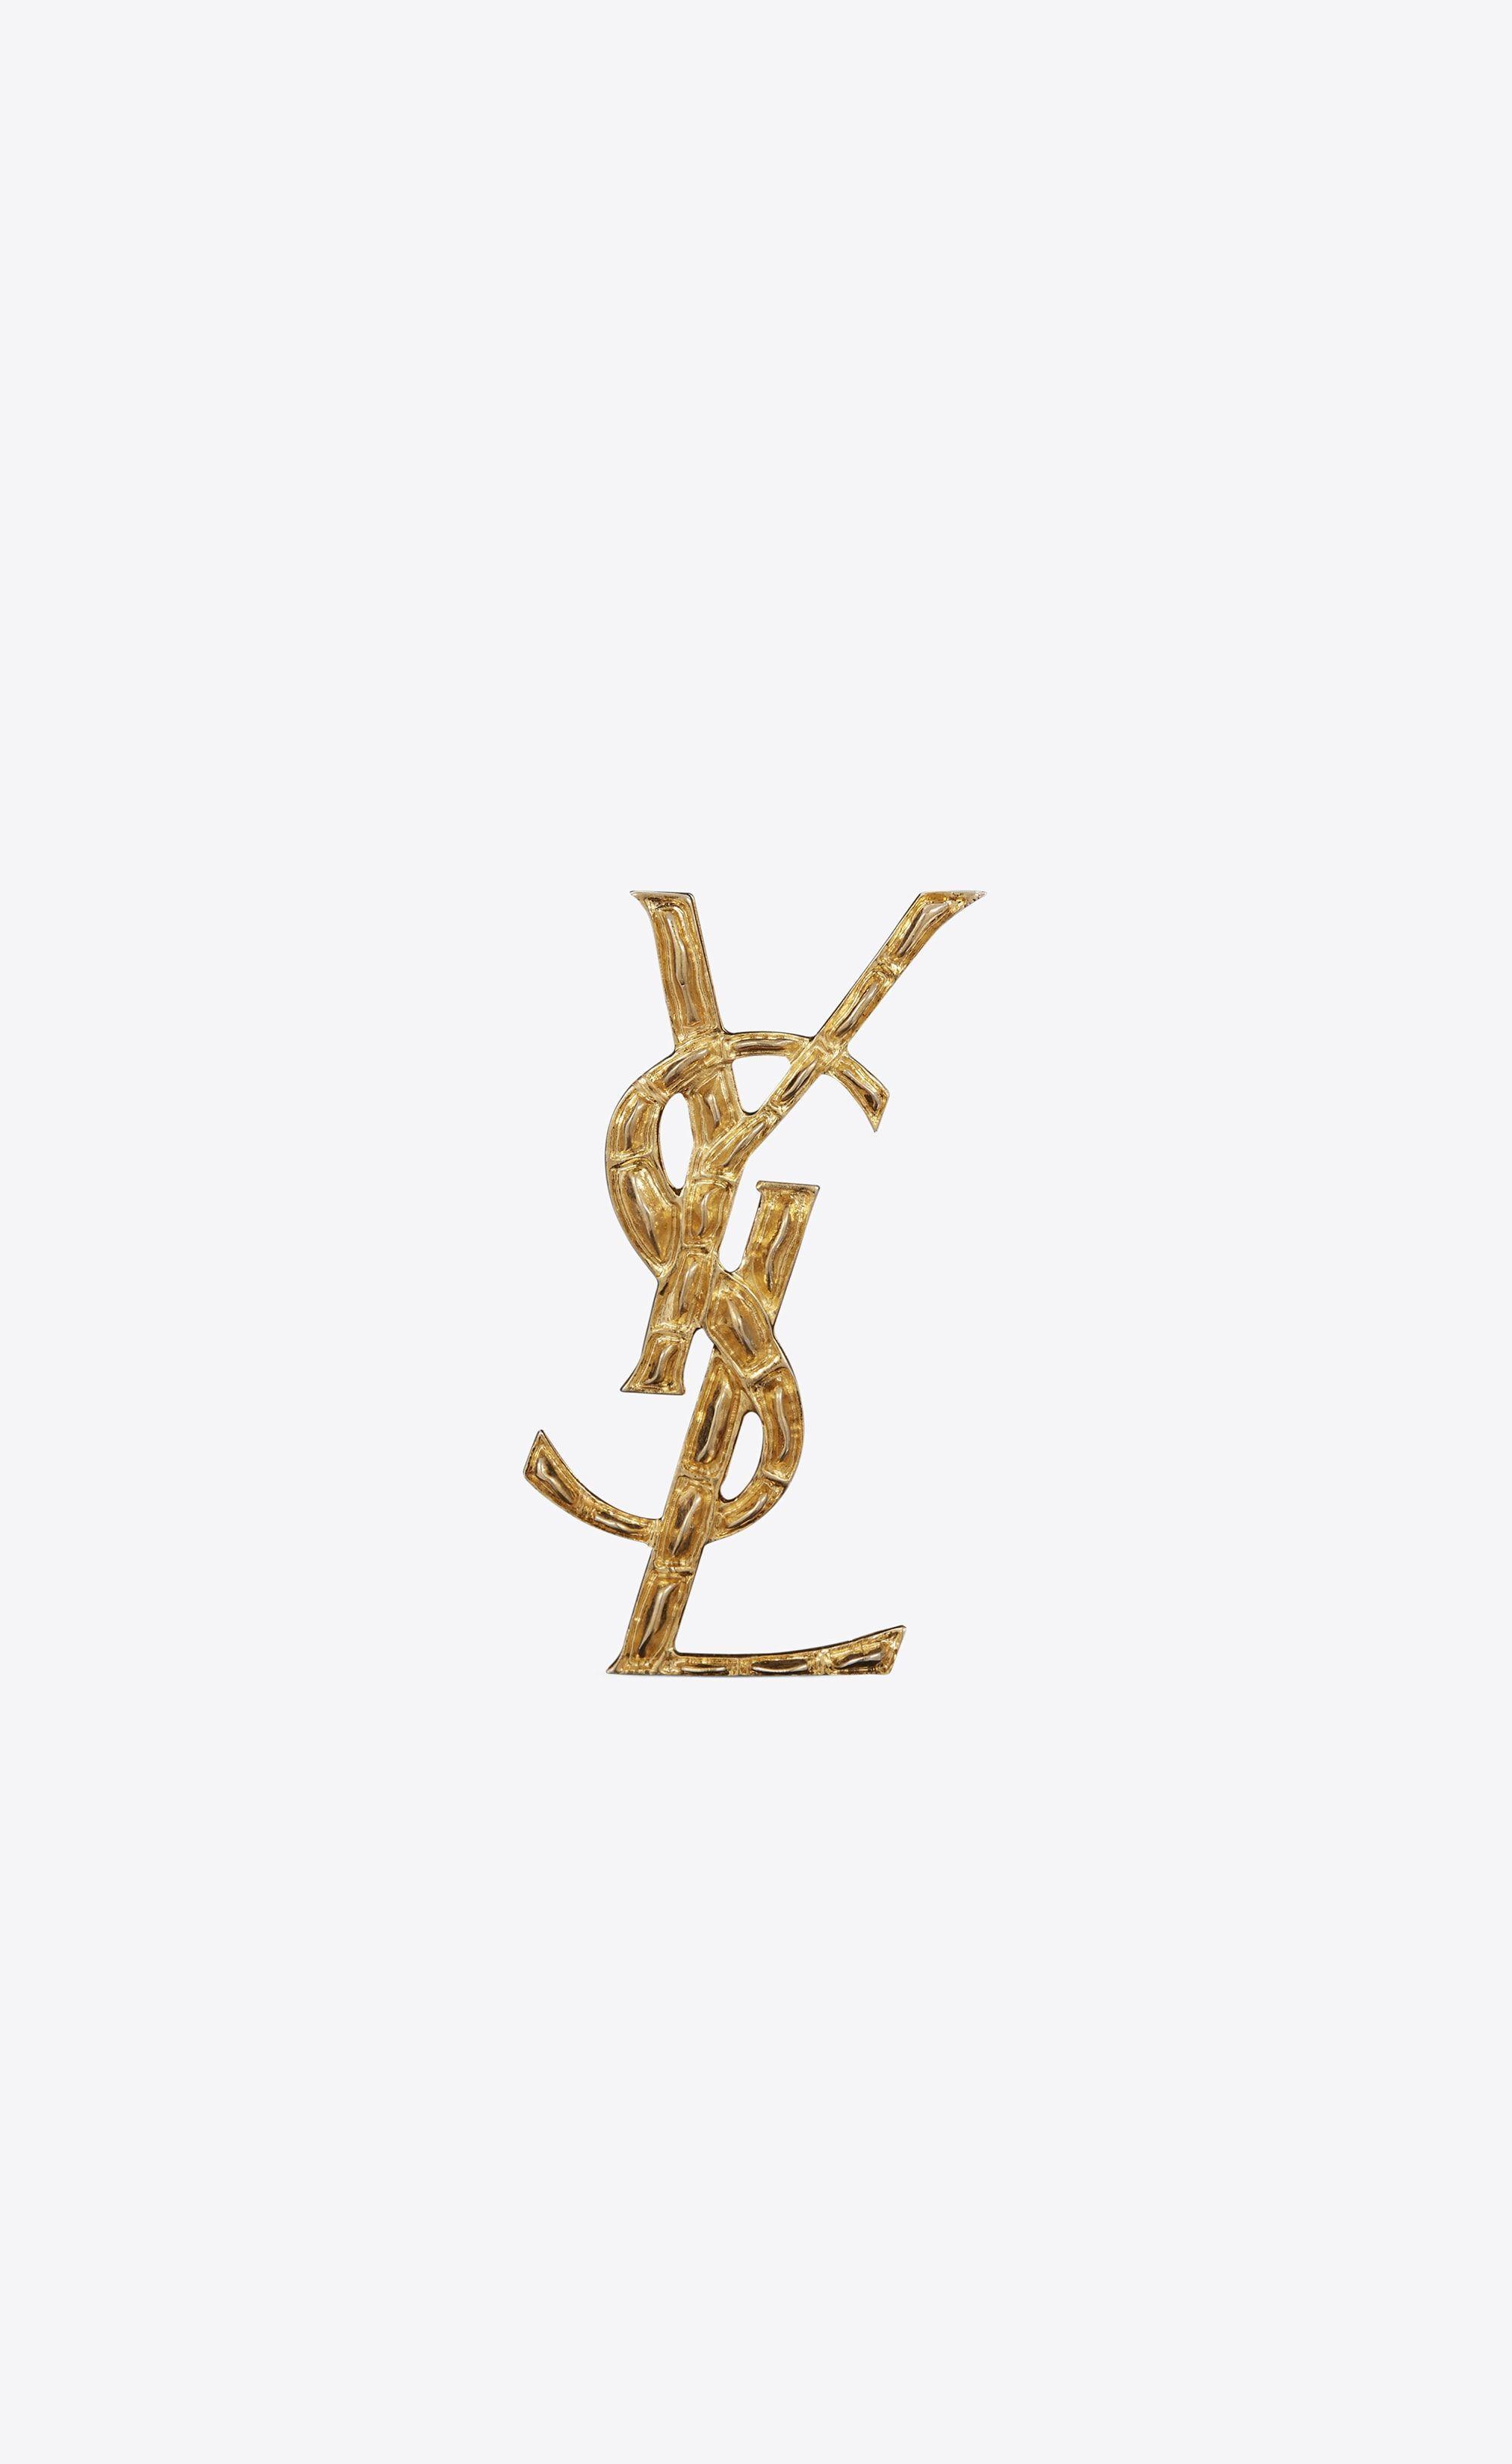 Ysl Iphone Wallpapers Top Free Ysl Iphone Backgrounds Wallpaperaccess